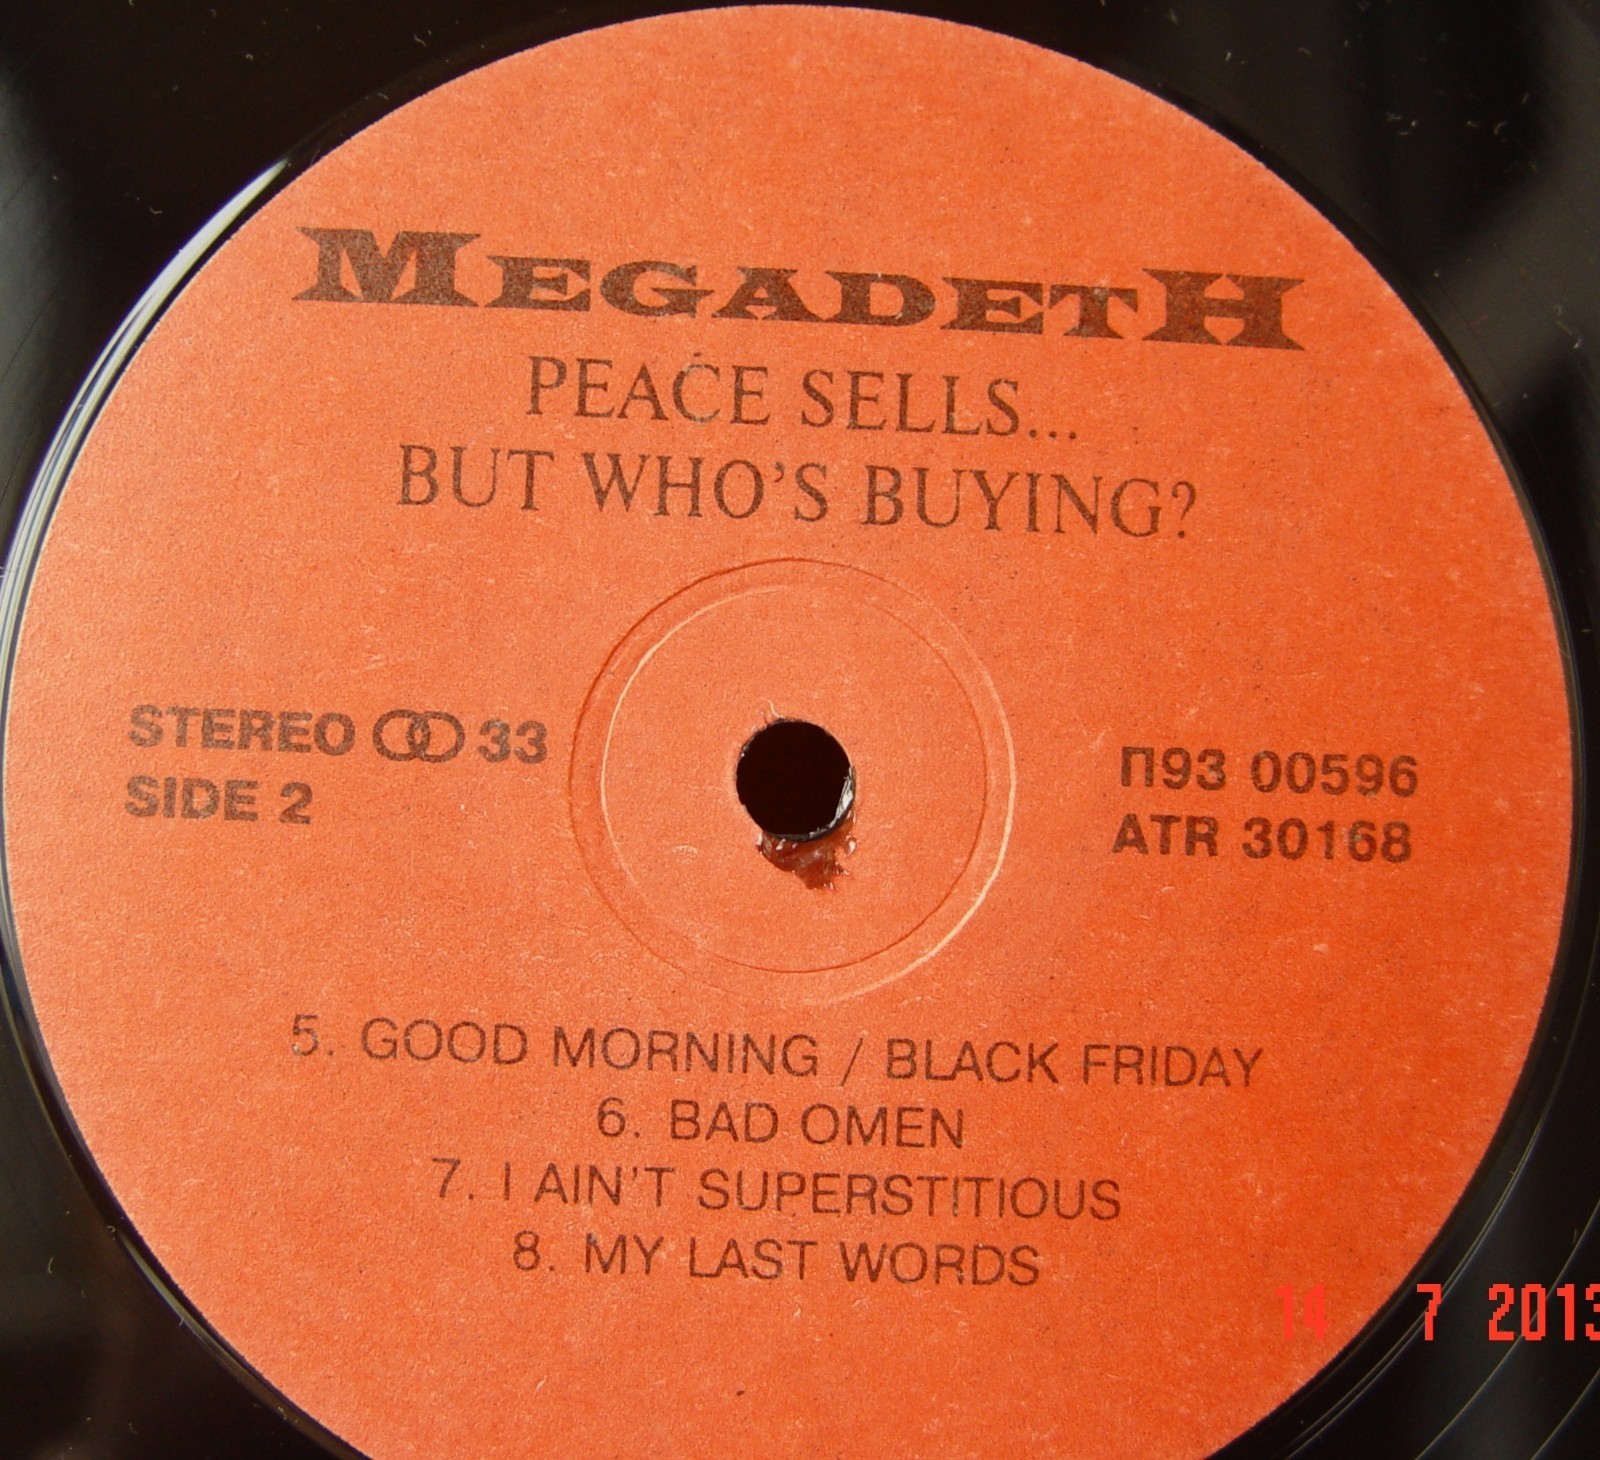 MEGADETH. Peace Sells… But Who's Buying?